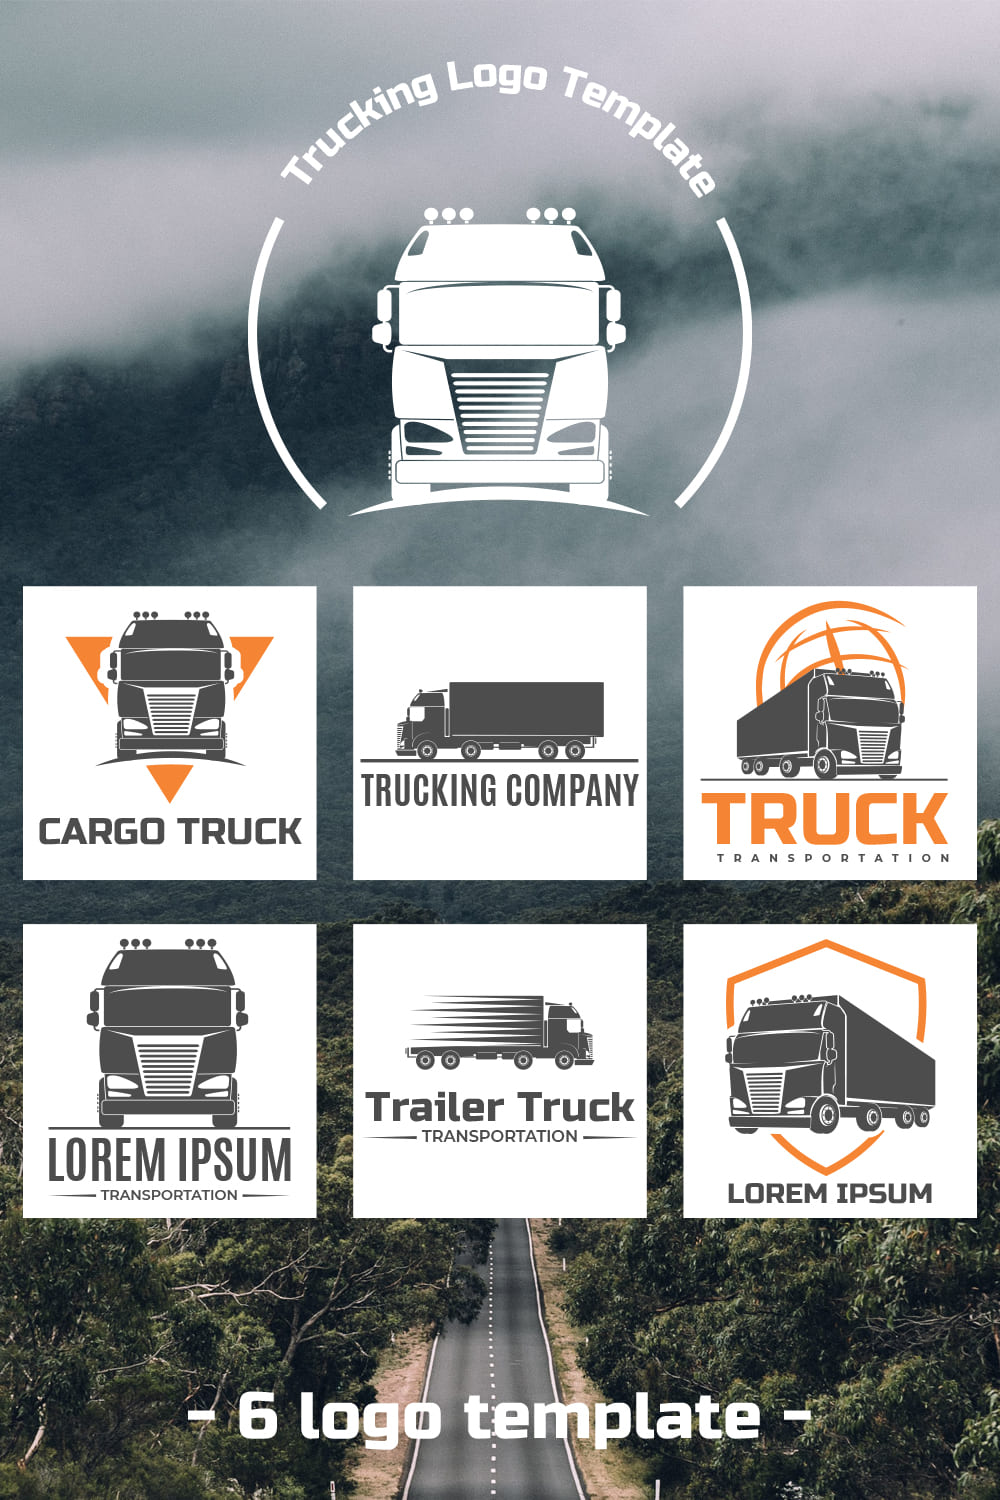 So simple and understandable trucking logos.